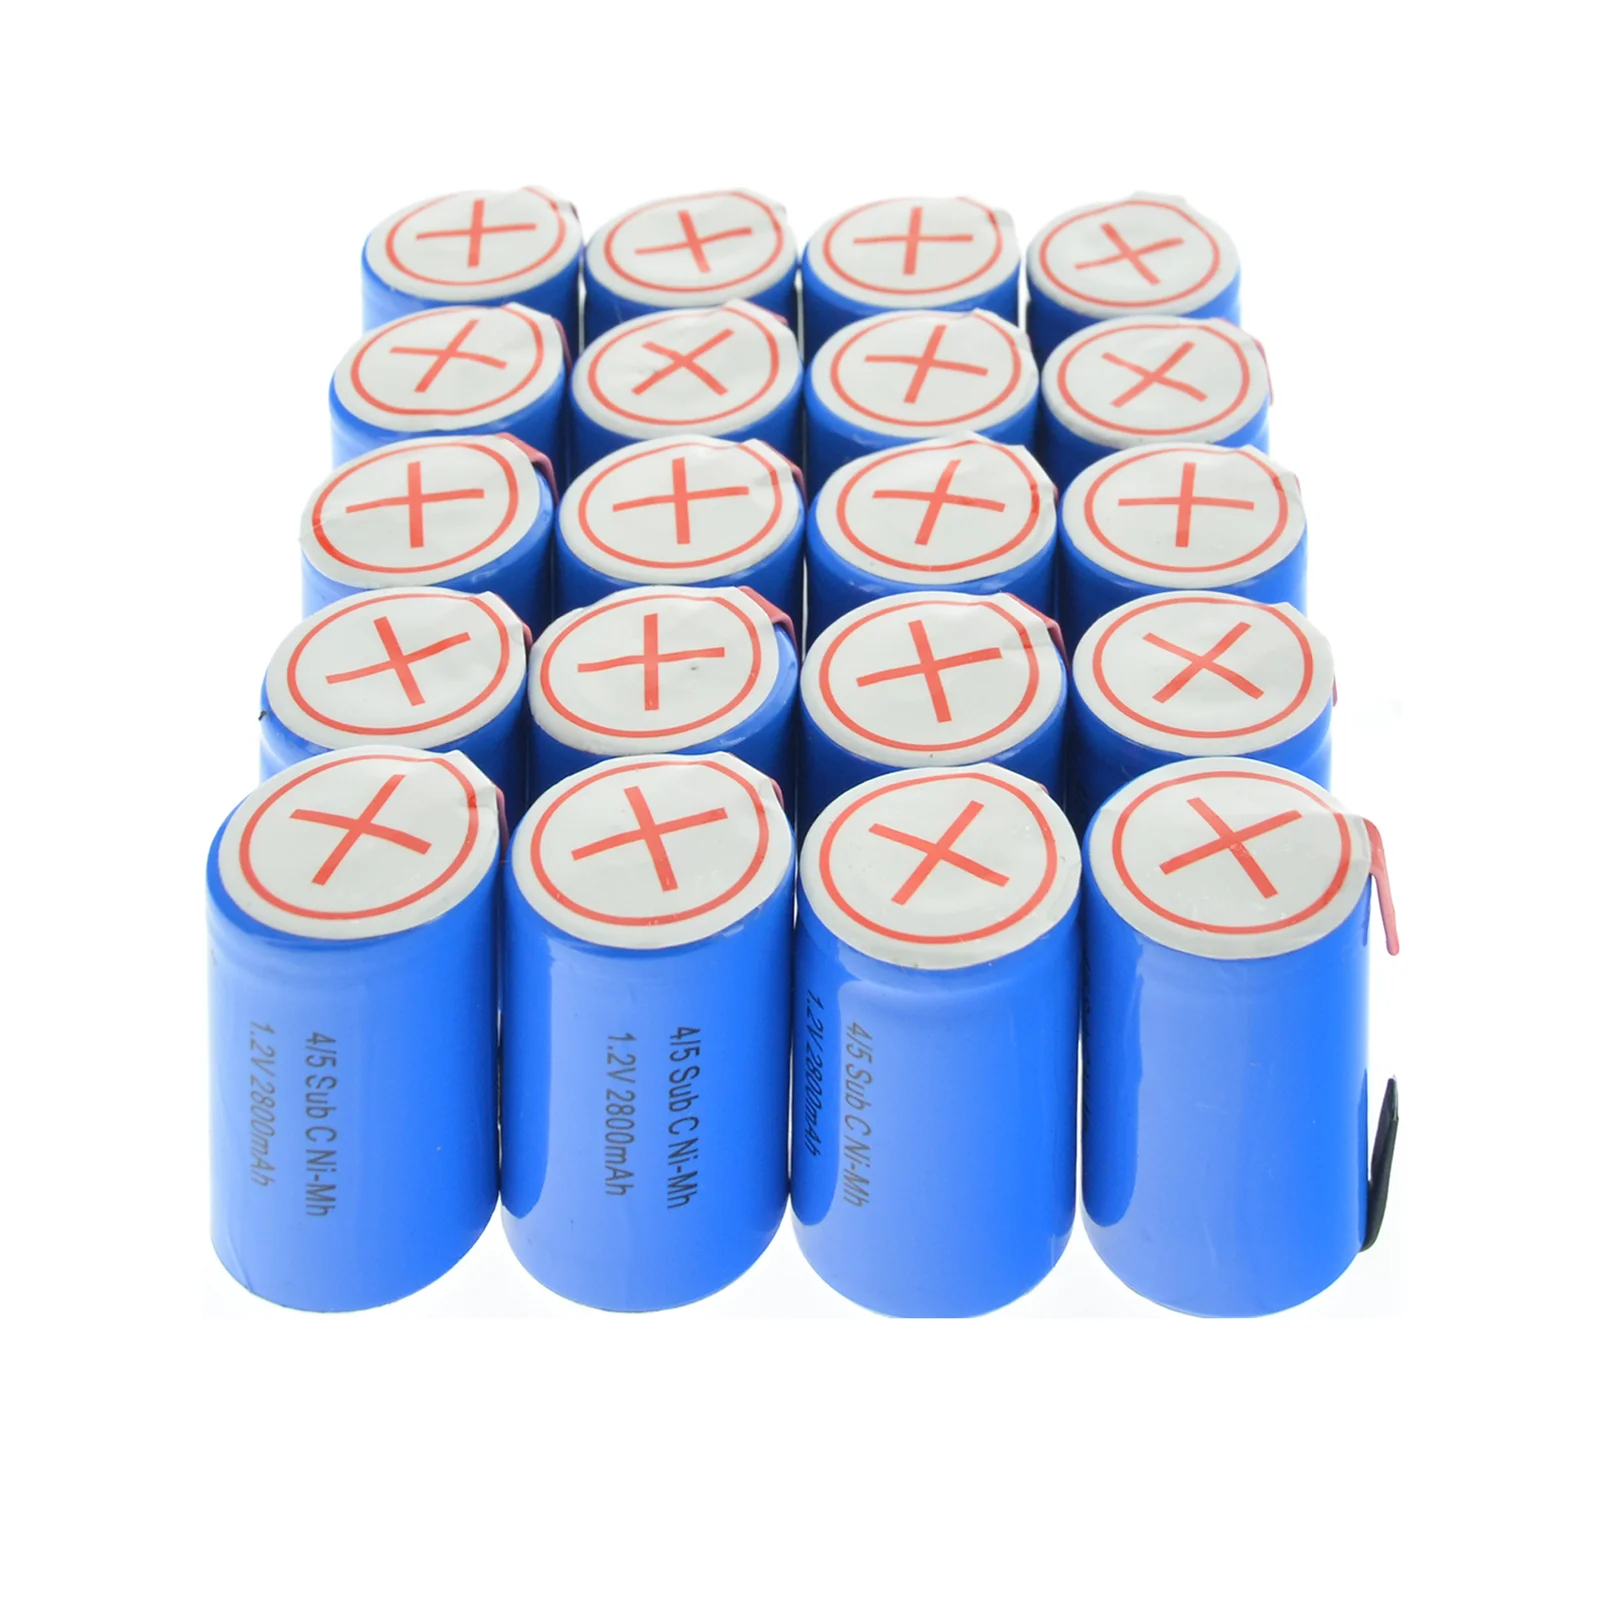 New 4/5SC Sub C Li-ion Li-Po Lithium Battery High-discharge 1.2V 2800mAh Rechargeable Ni-MH Batteries with Welding Tabs images - 6